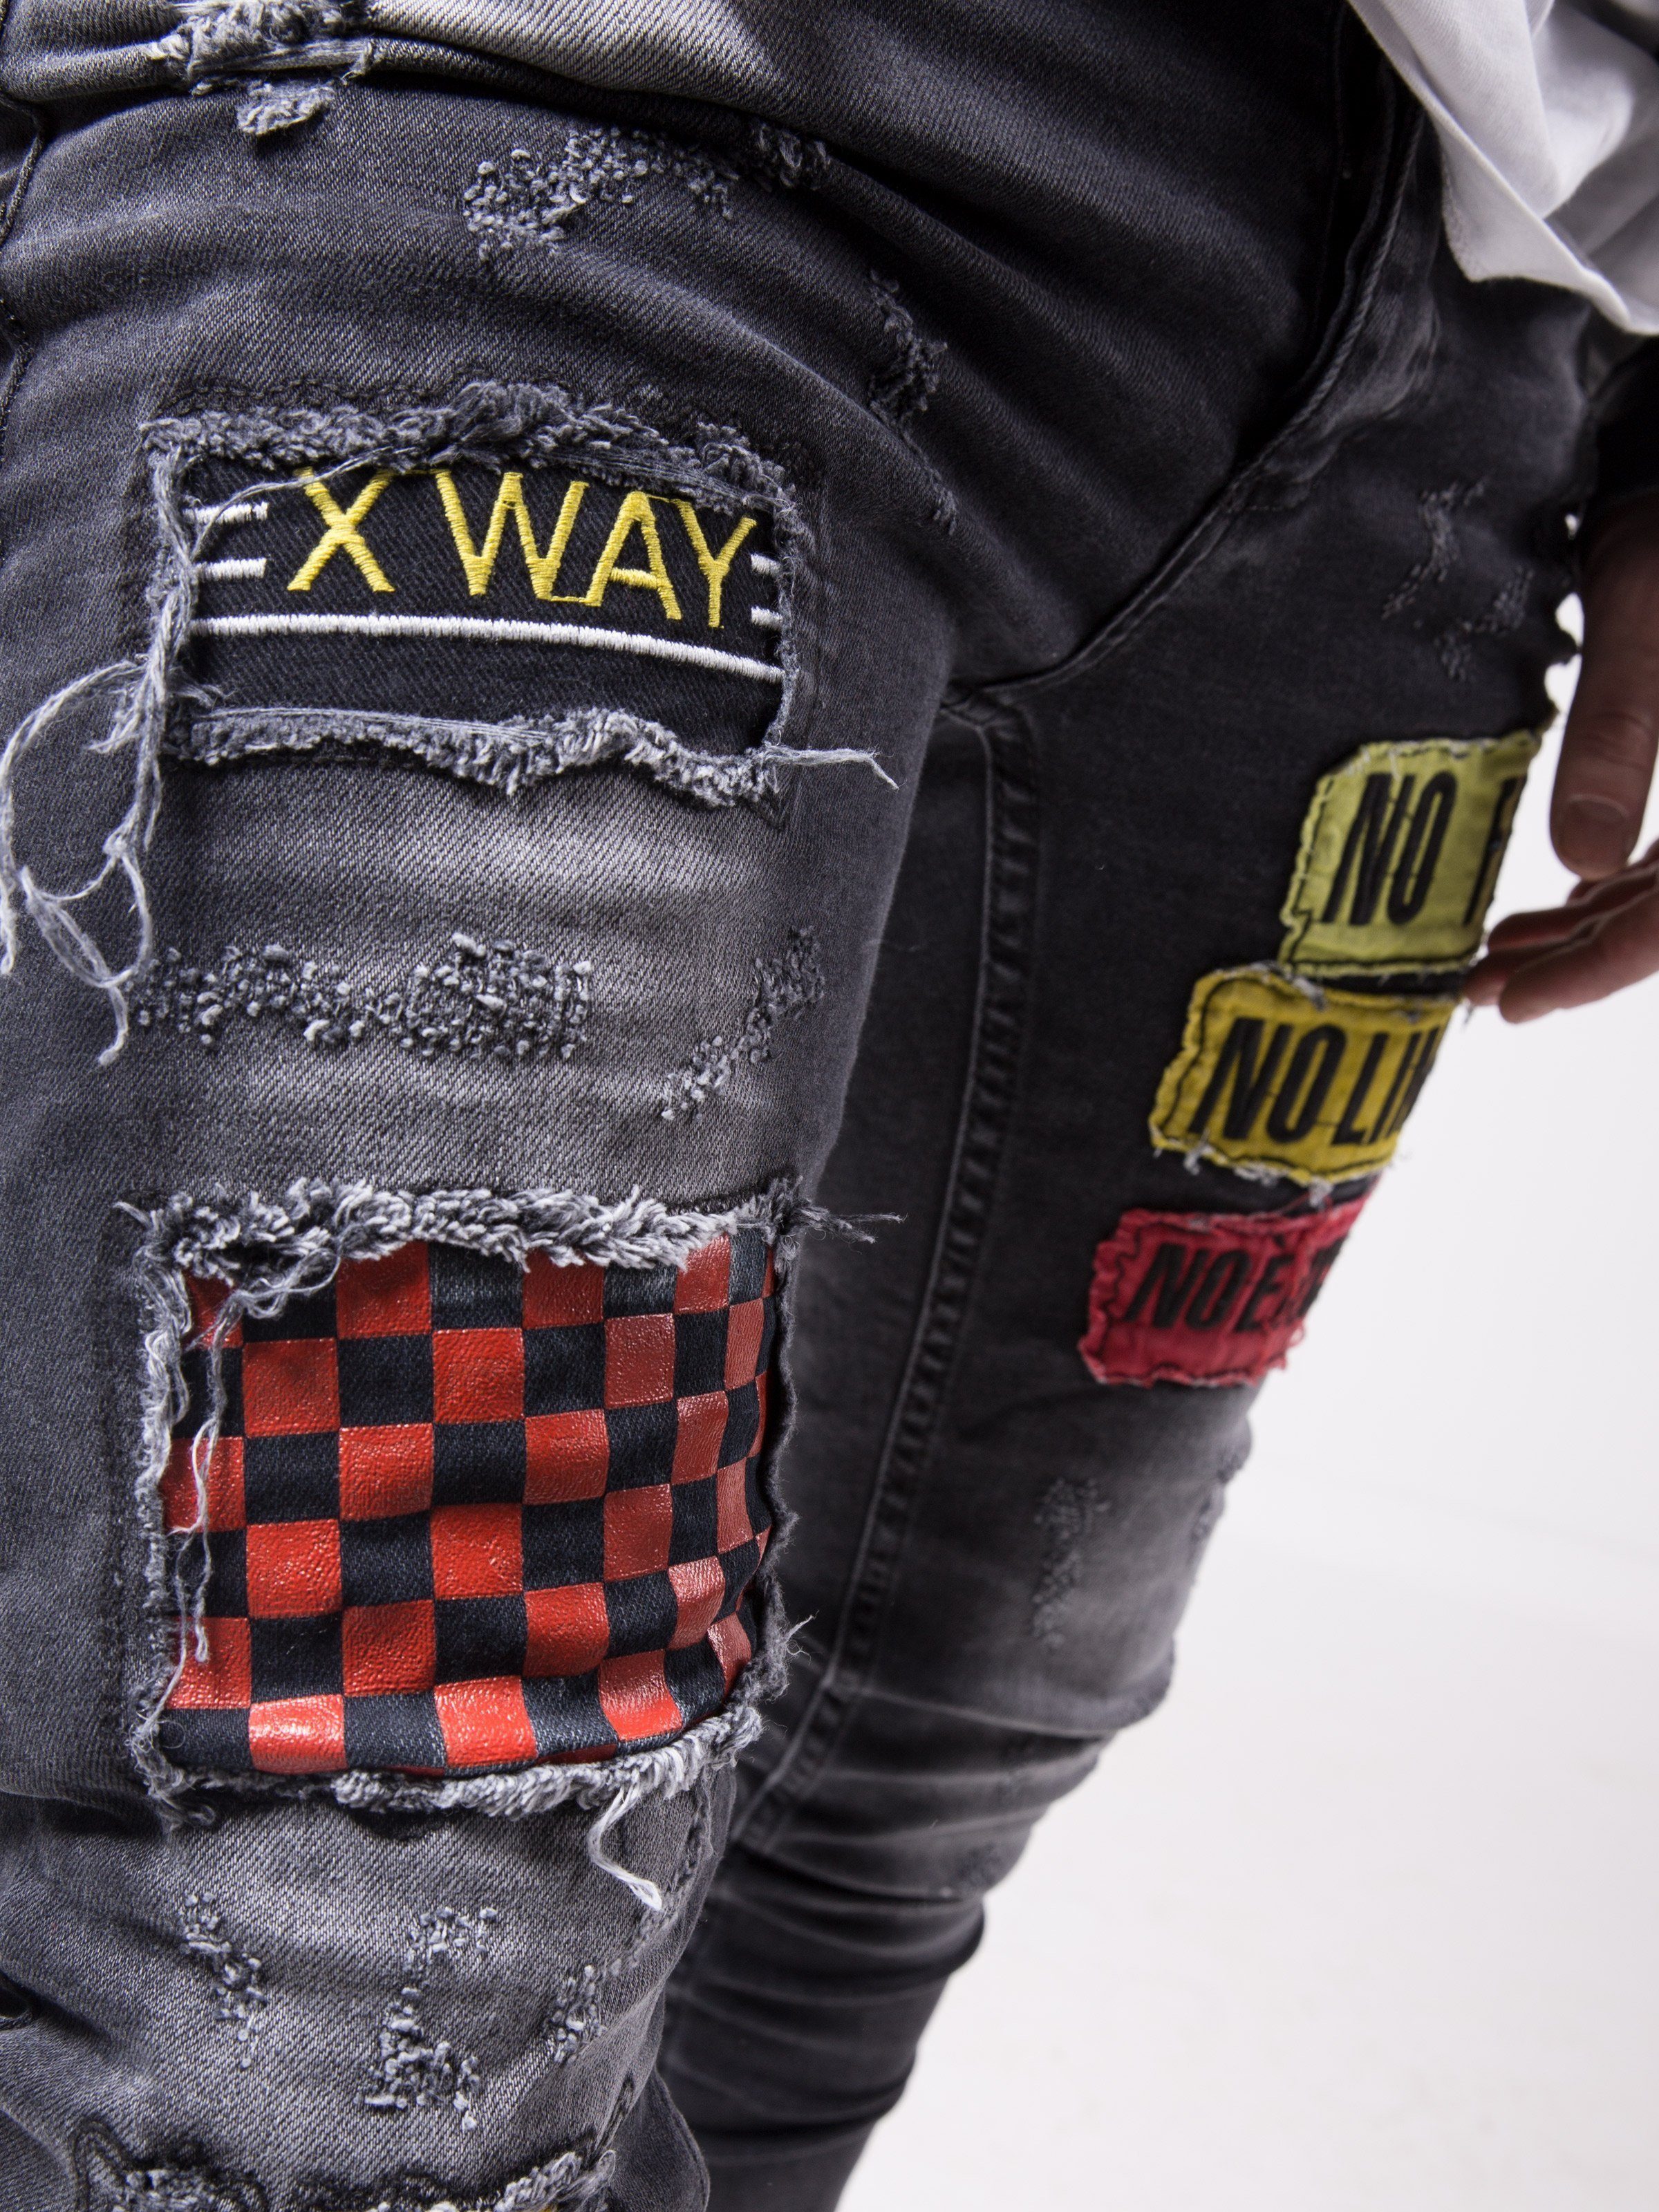 A pair of FEARLESS skinny fit jeans with a patch that says x way, made from elastic fabric for a smooth feel.